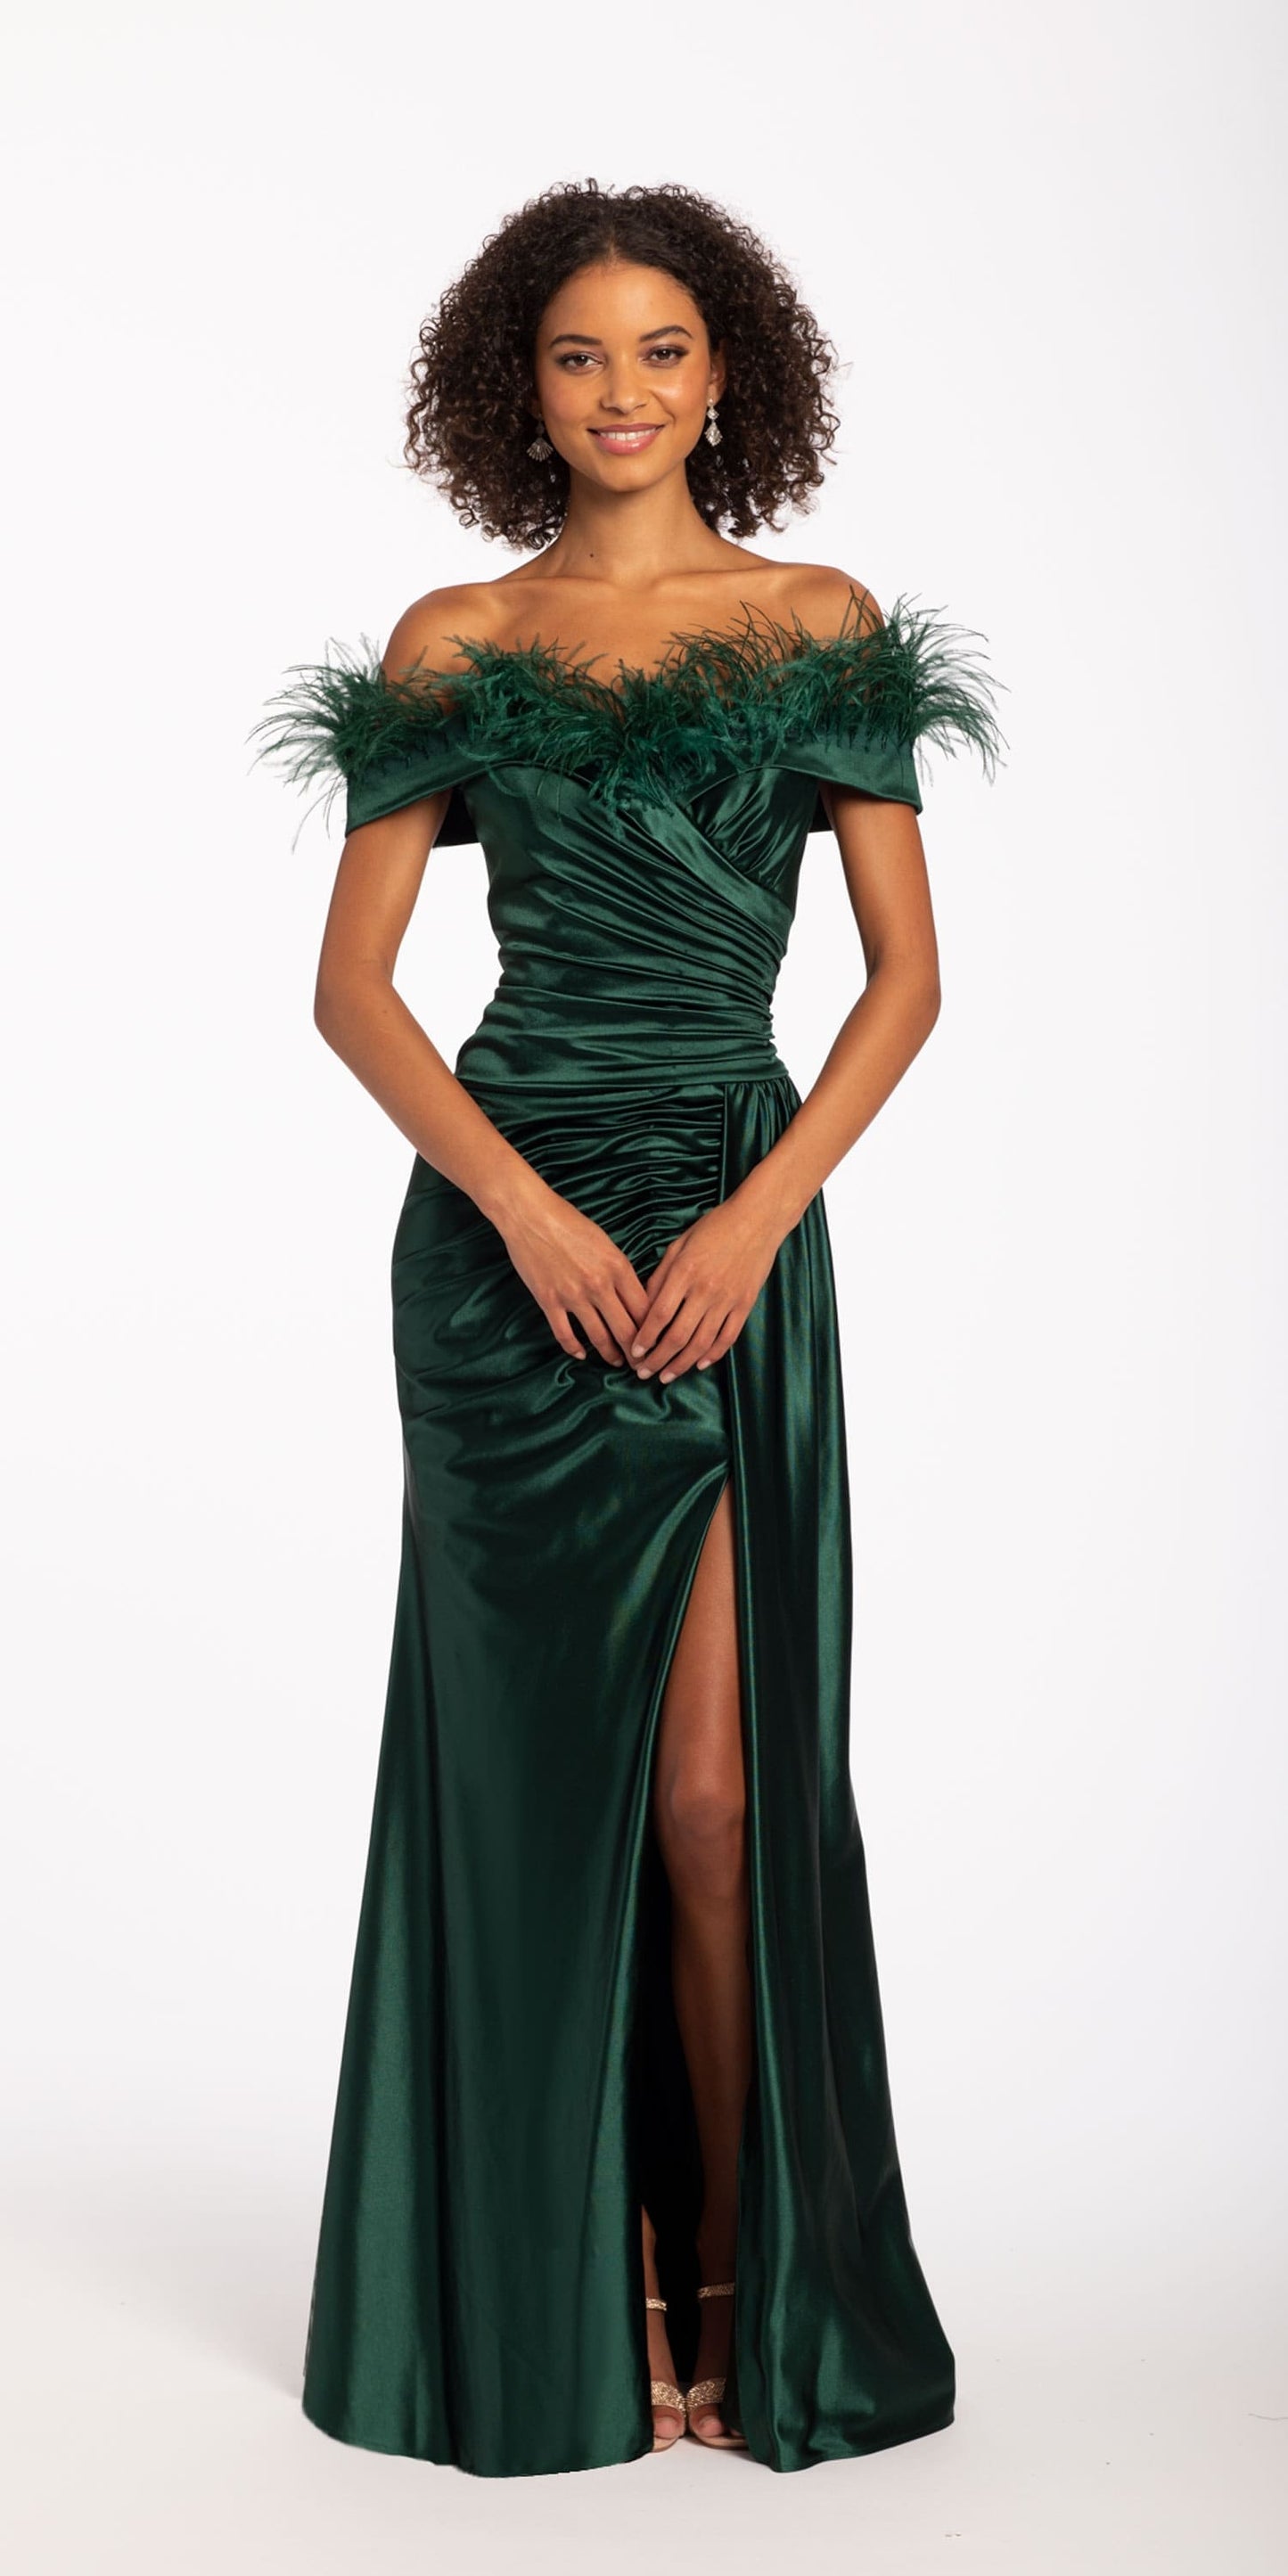 Camille La Vie Off the Shoulder Feather Stretch Satin Ruched Dress with Side Slit missy / 4 / emerald